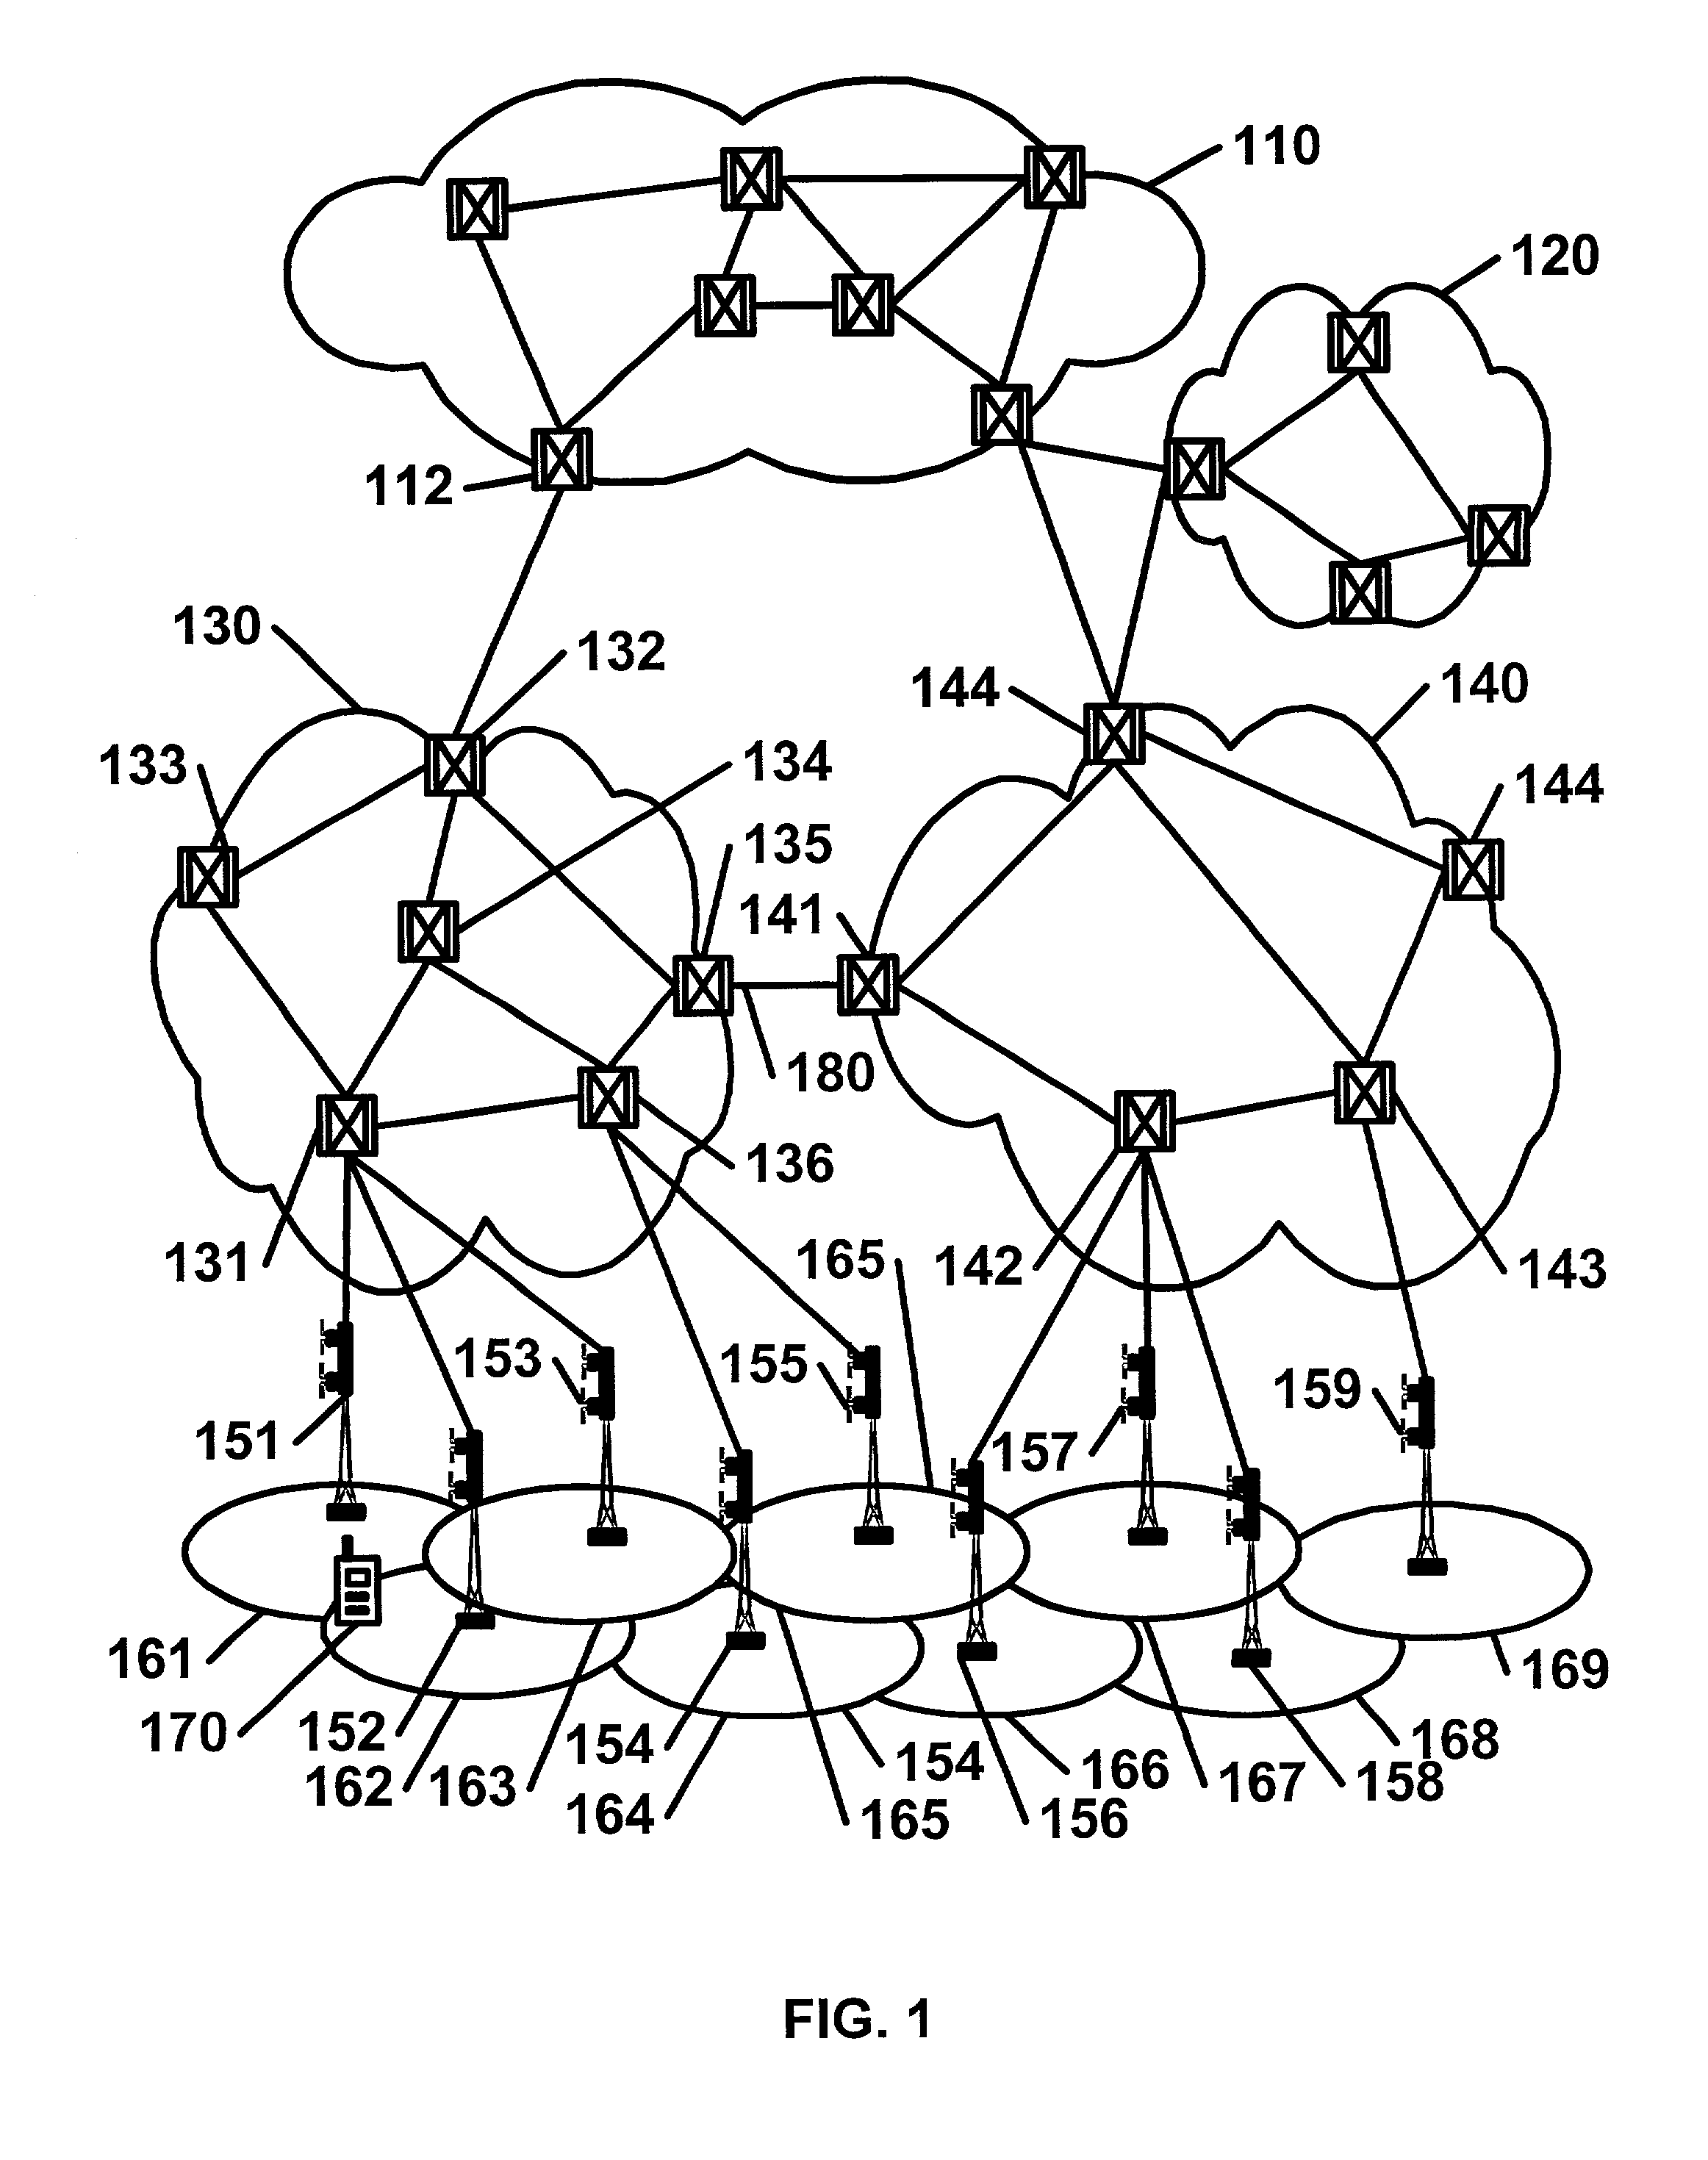 Wireless label switched packet transfer network